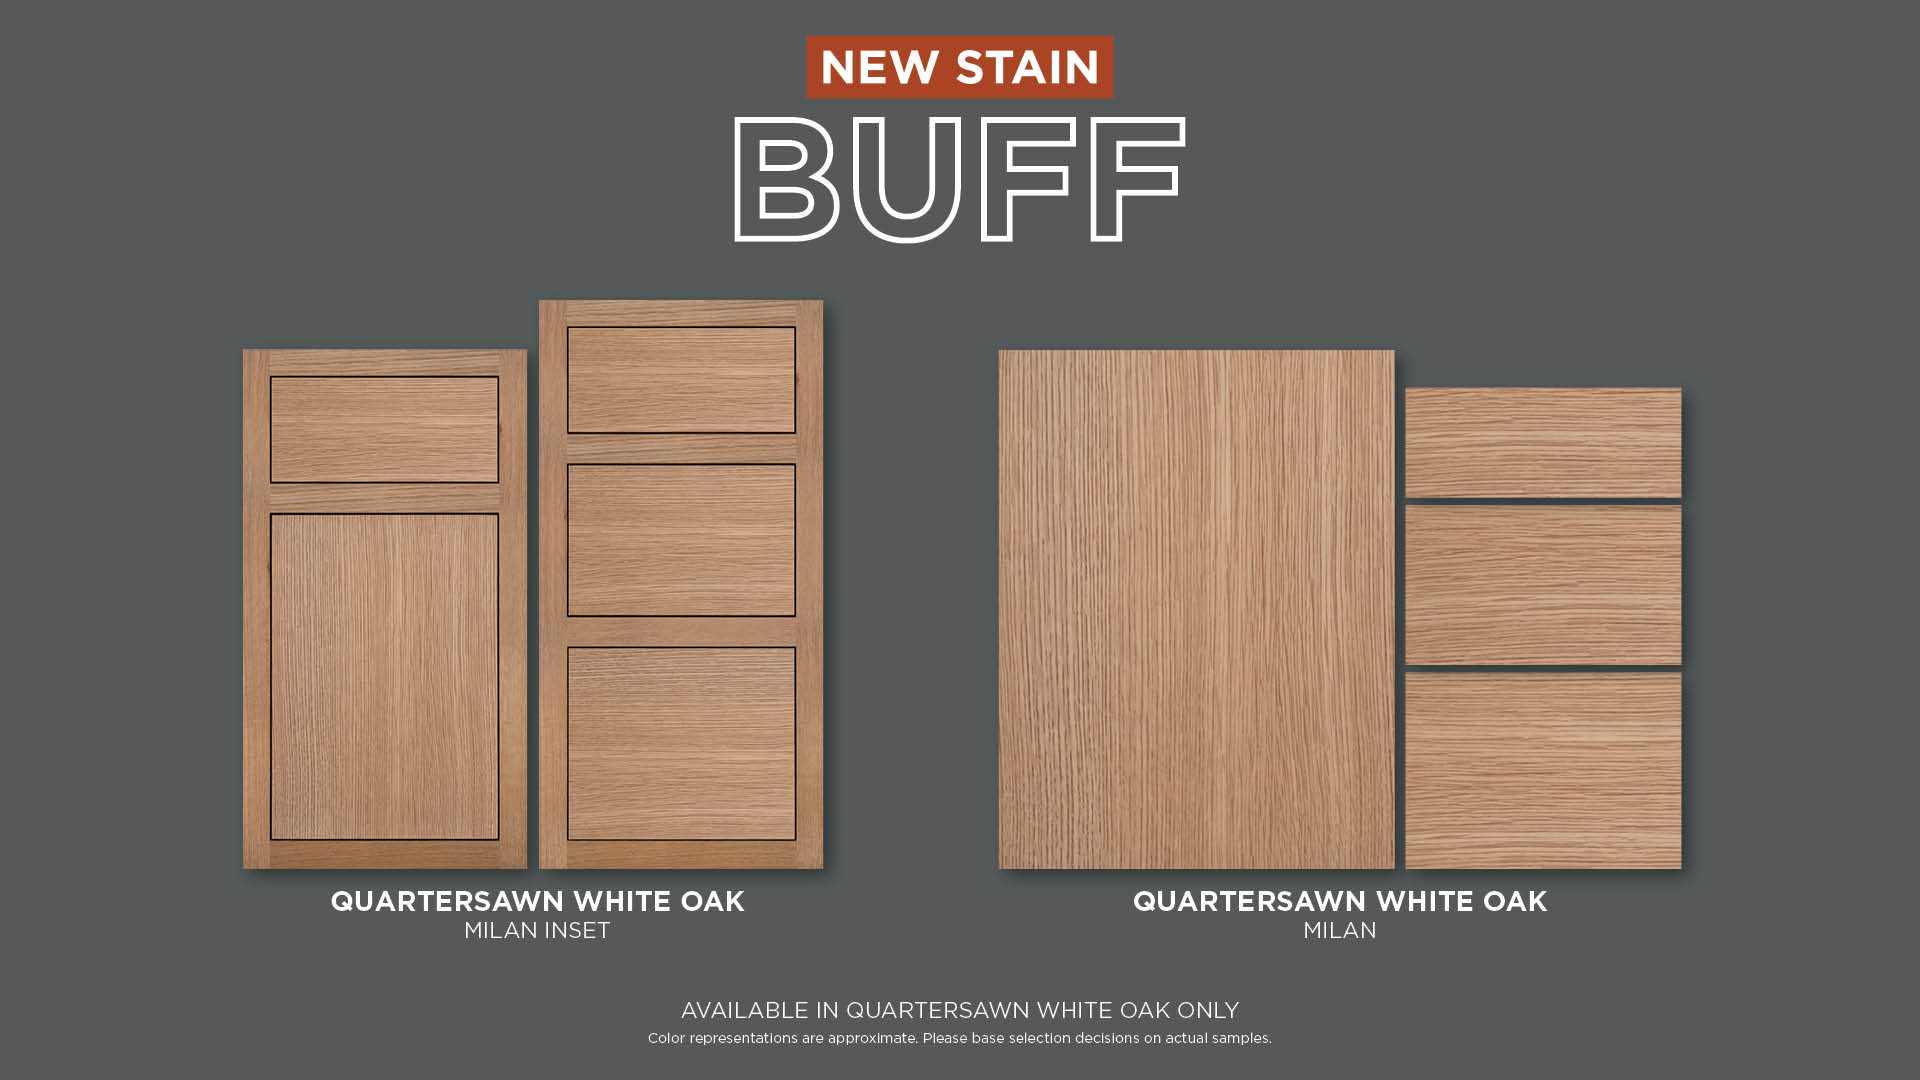 display of two cabinetry styles, showcasing white oak with milan inset, and white oak without the inset.